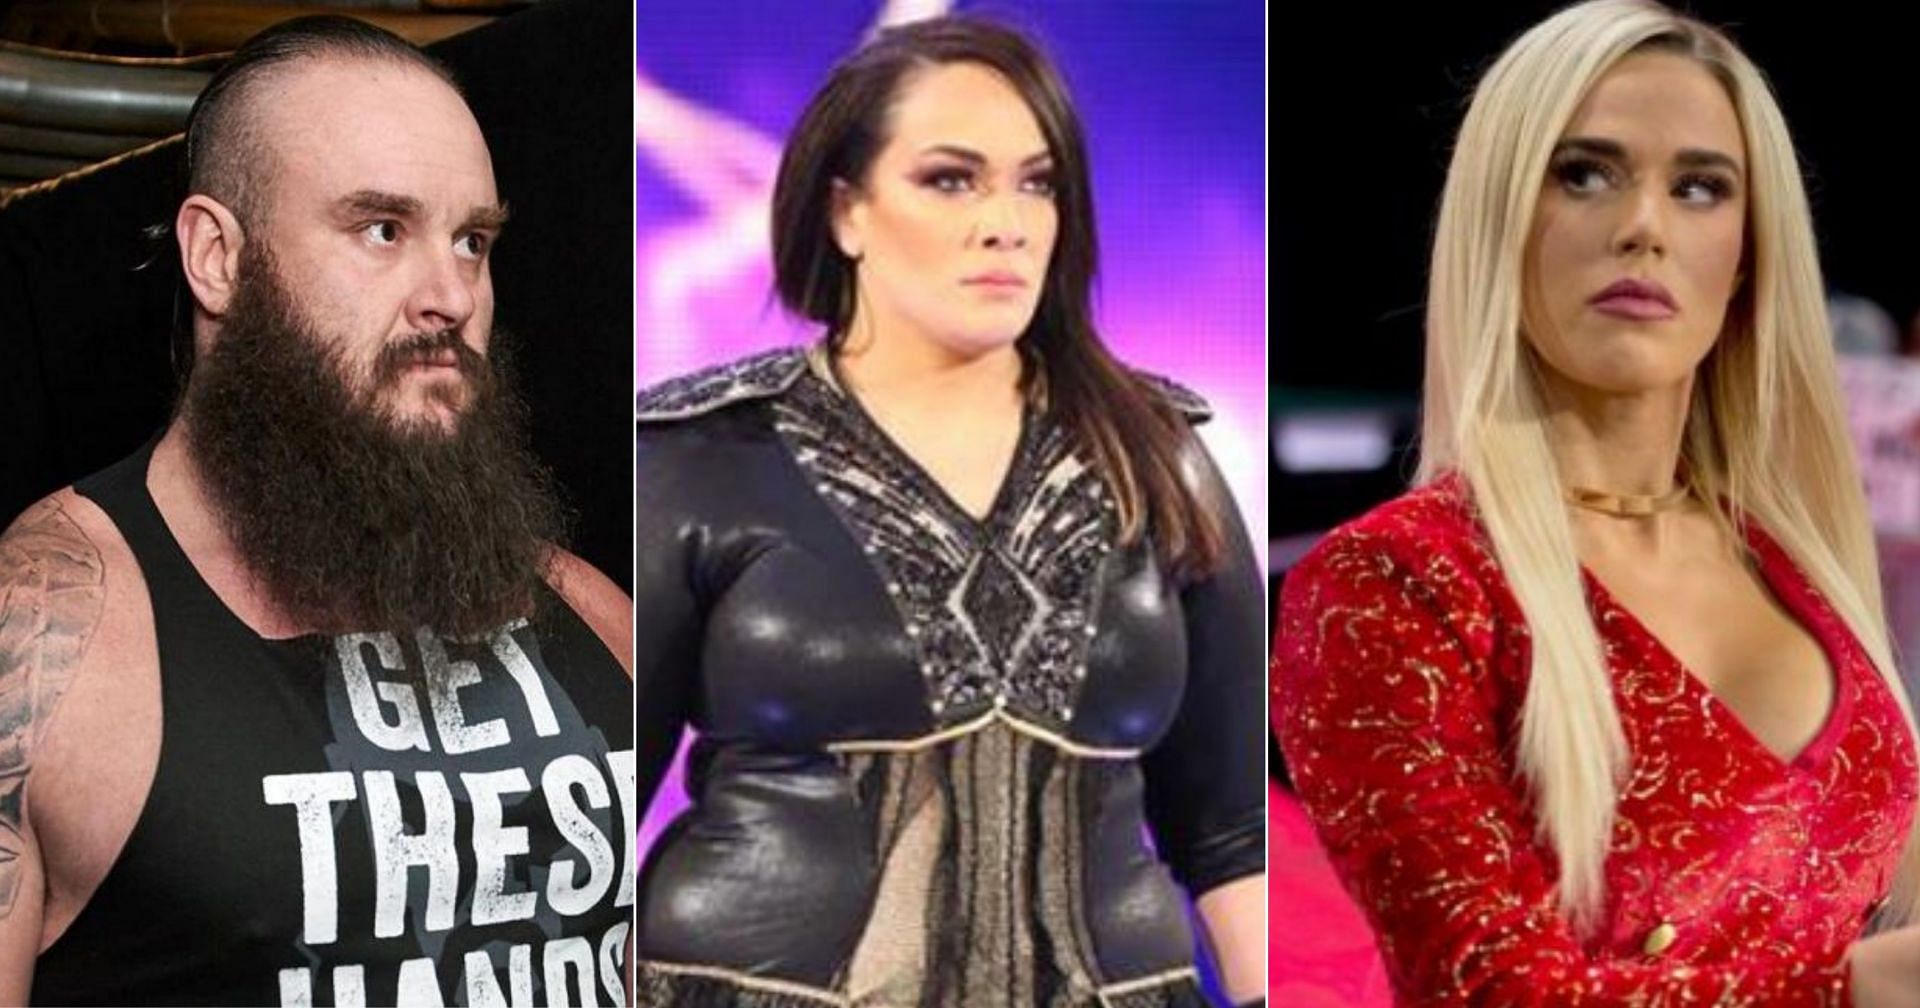 Several ex-WWE Stars were scheduled for the show